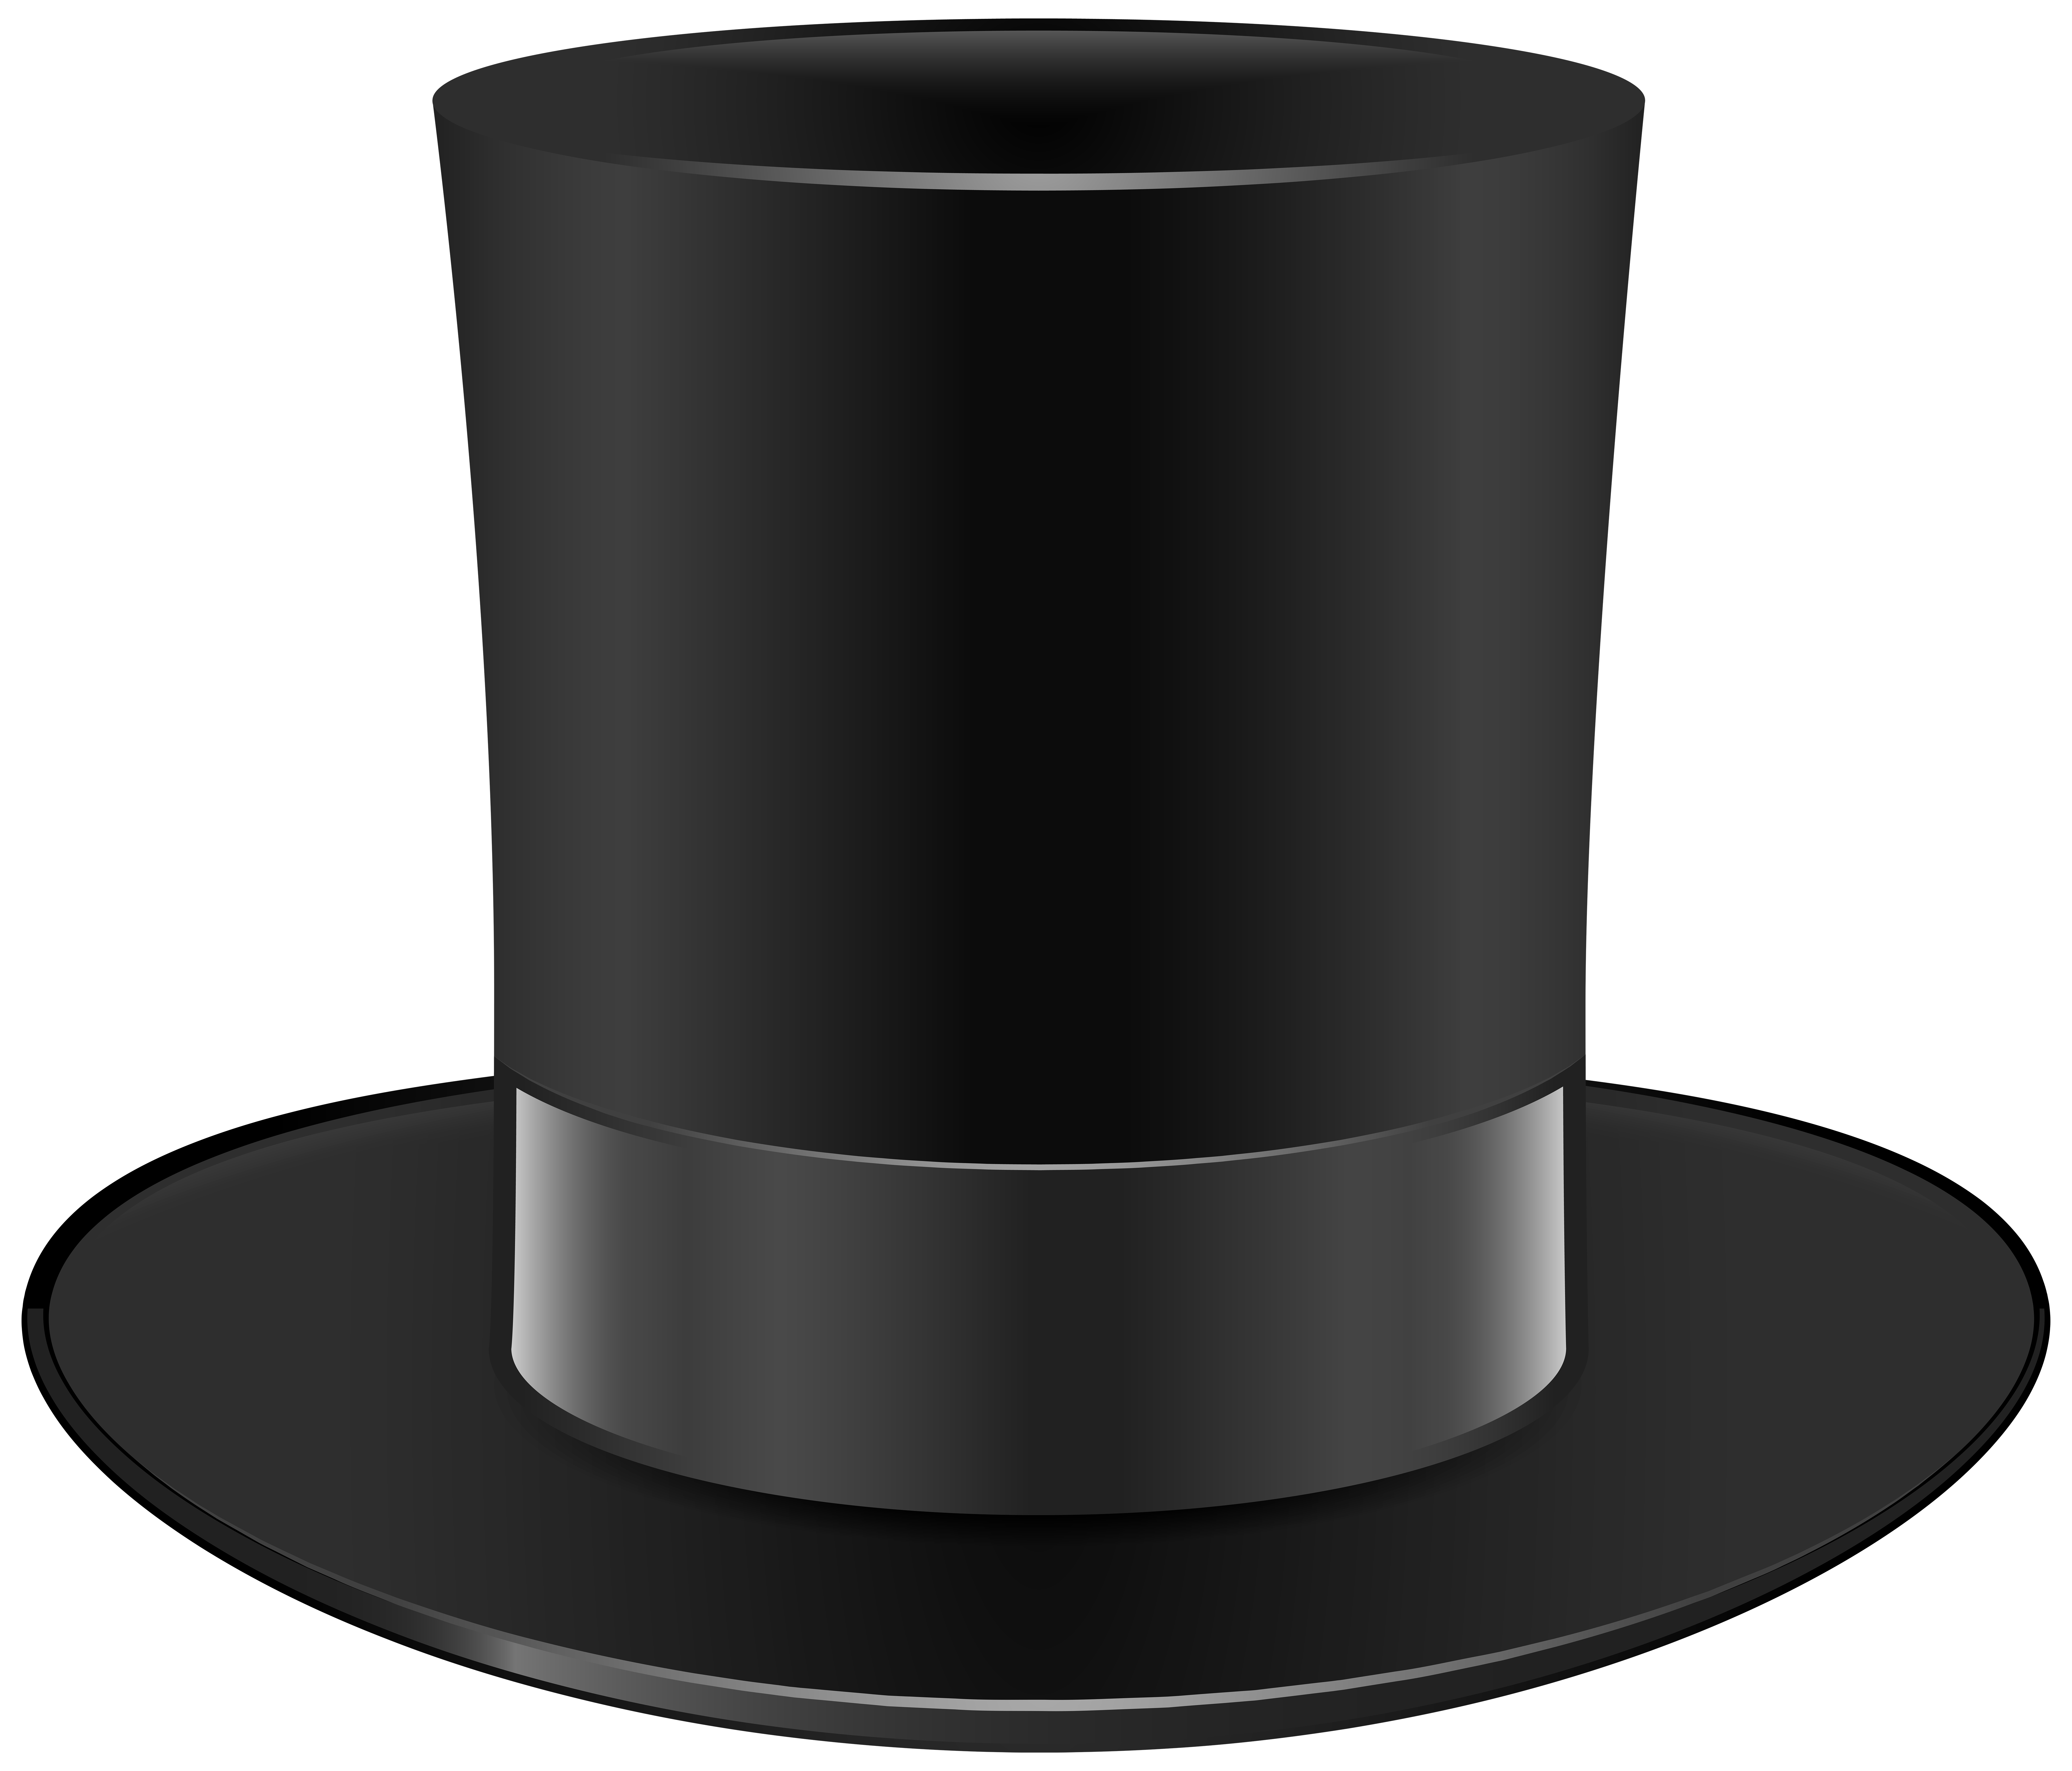 new years top hat clipart - photo #33